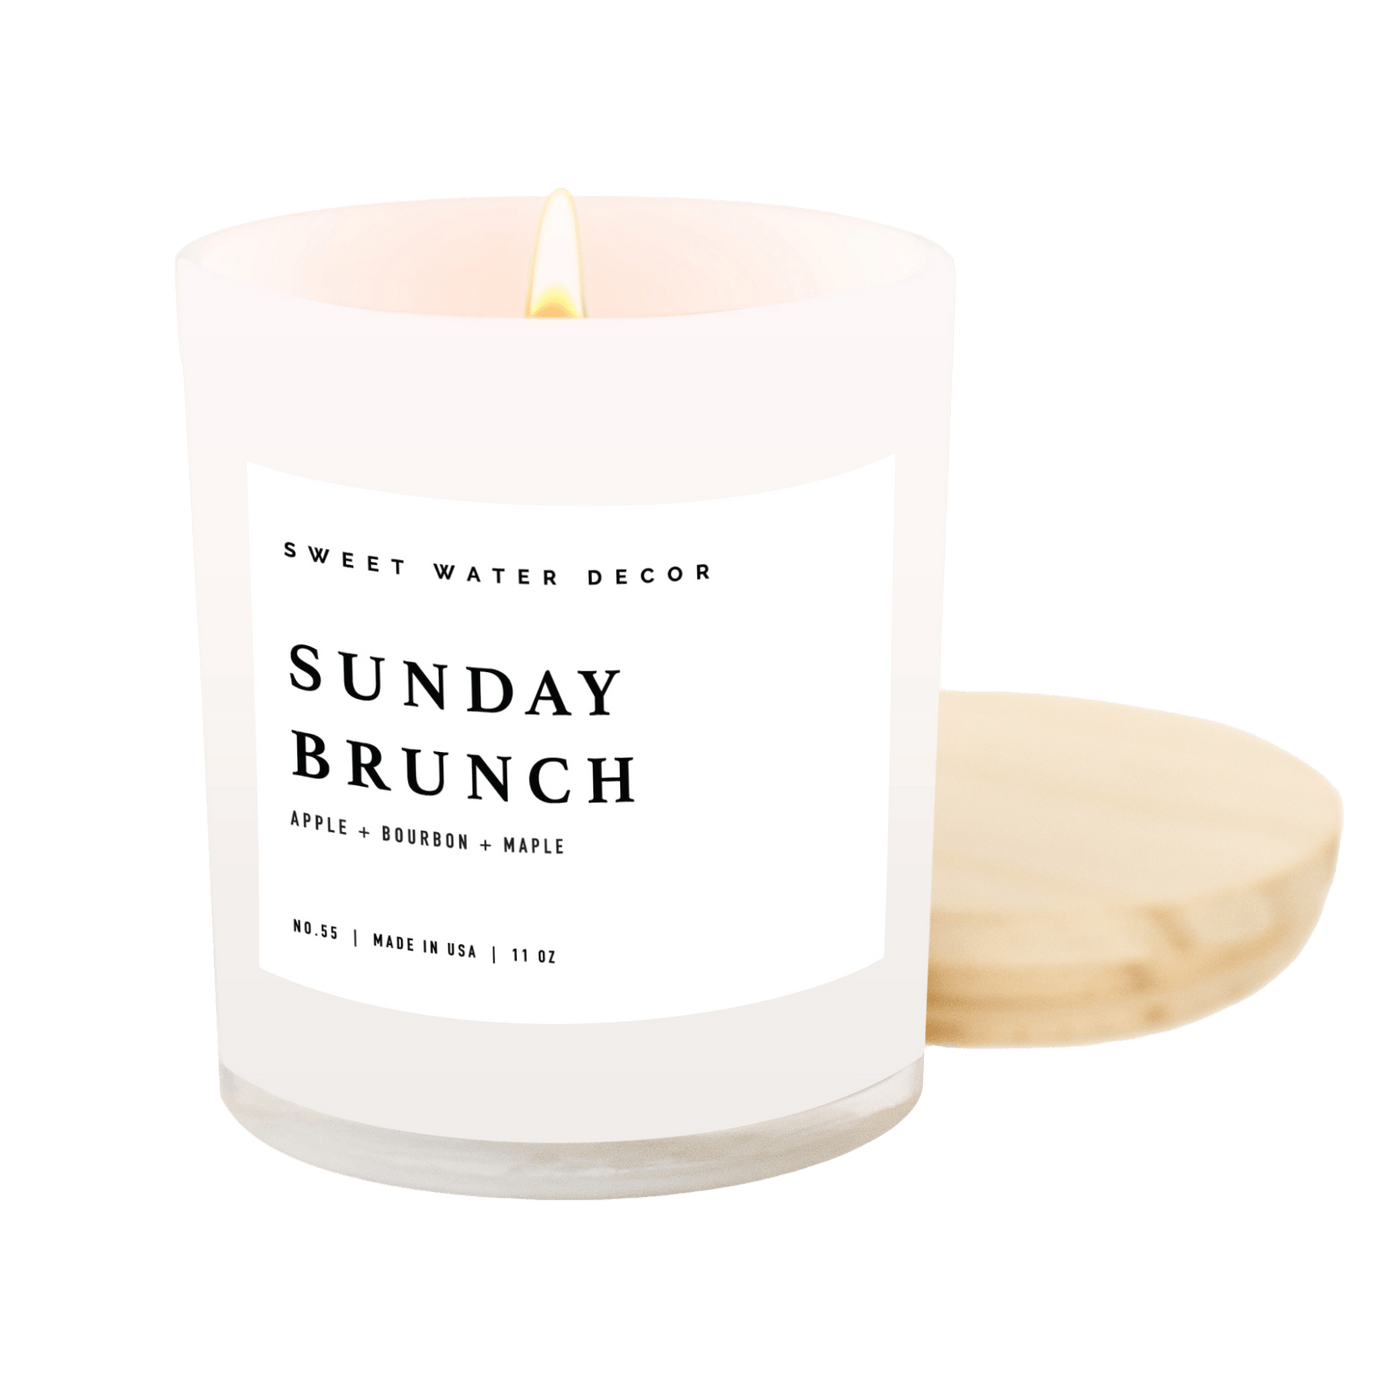 Sunday Brunch Soy Candle - White Jar - 11 oz - Sweet Water Decor - Candles